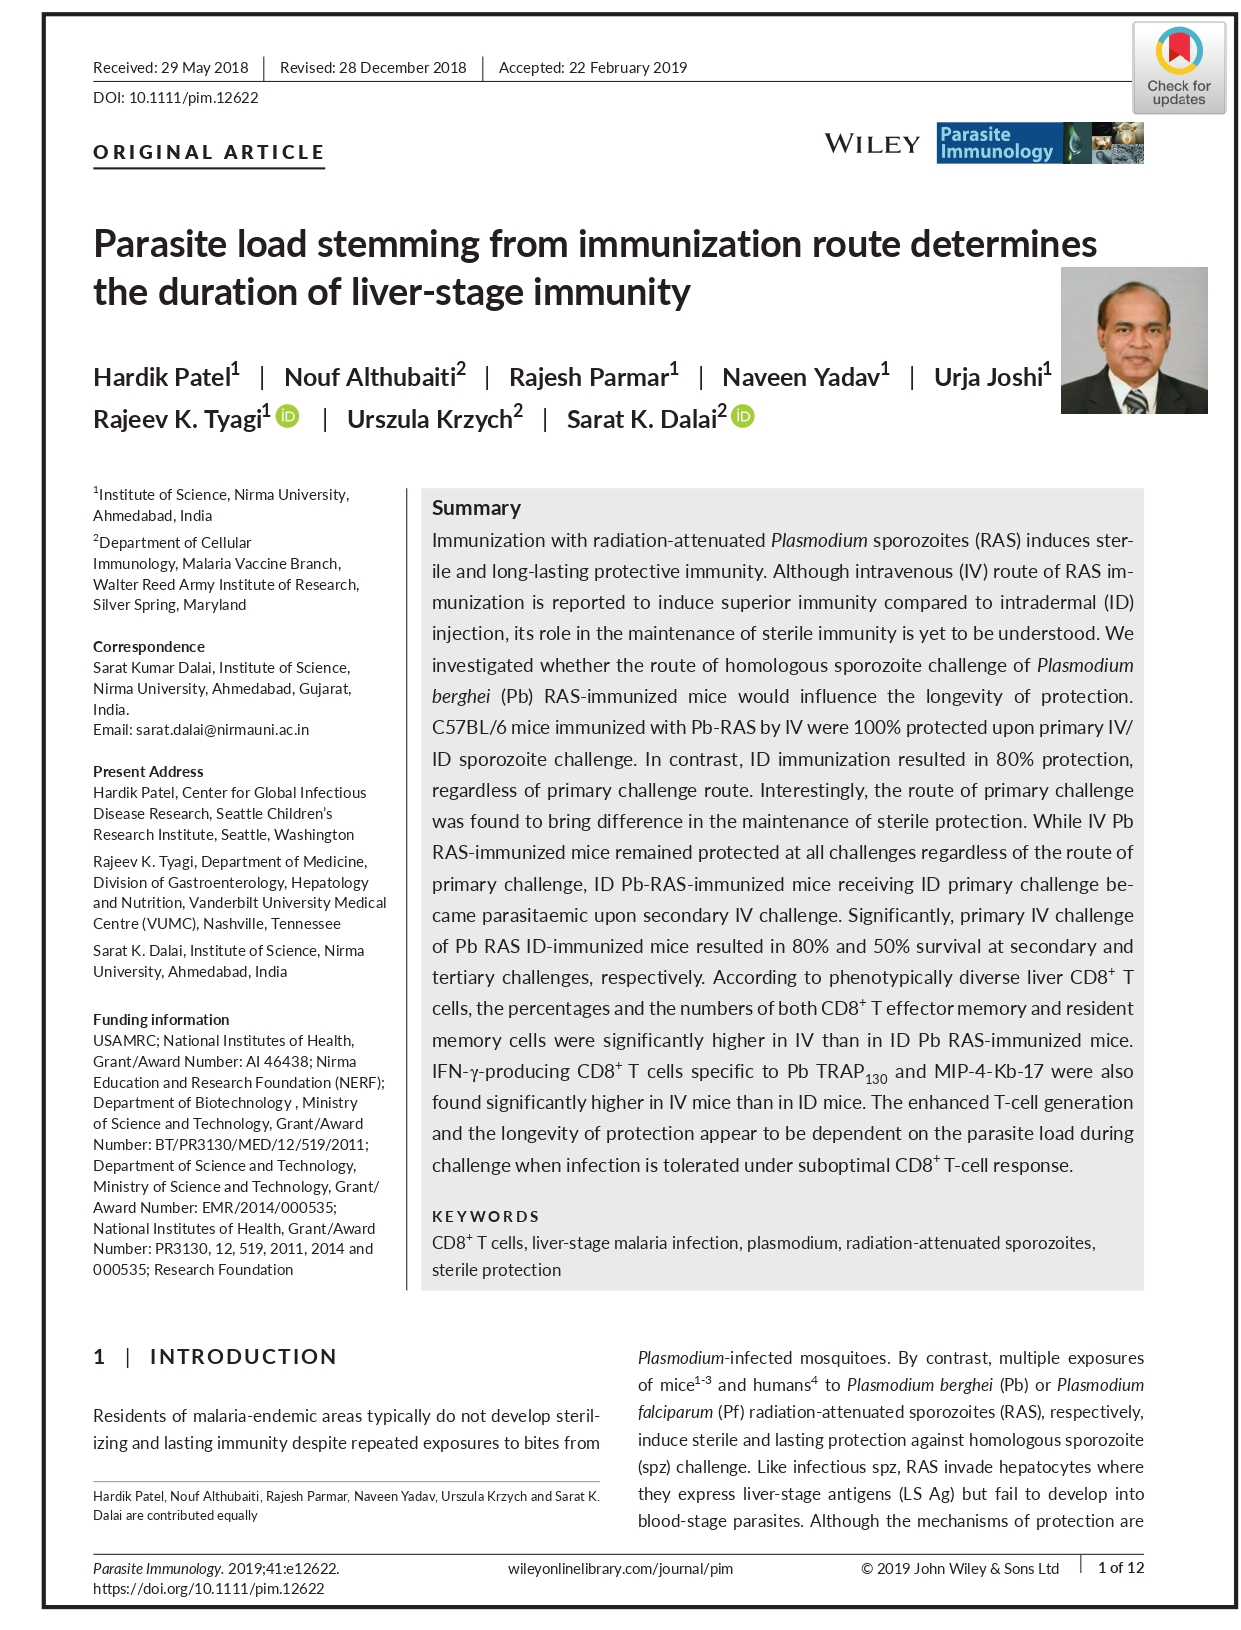 Parasite load stemming from immunization route determines the duration of liver?stage immunity